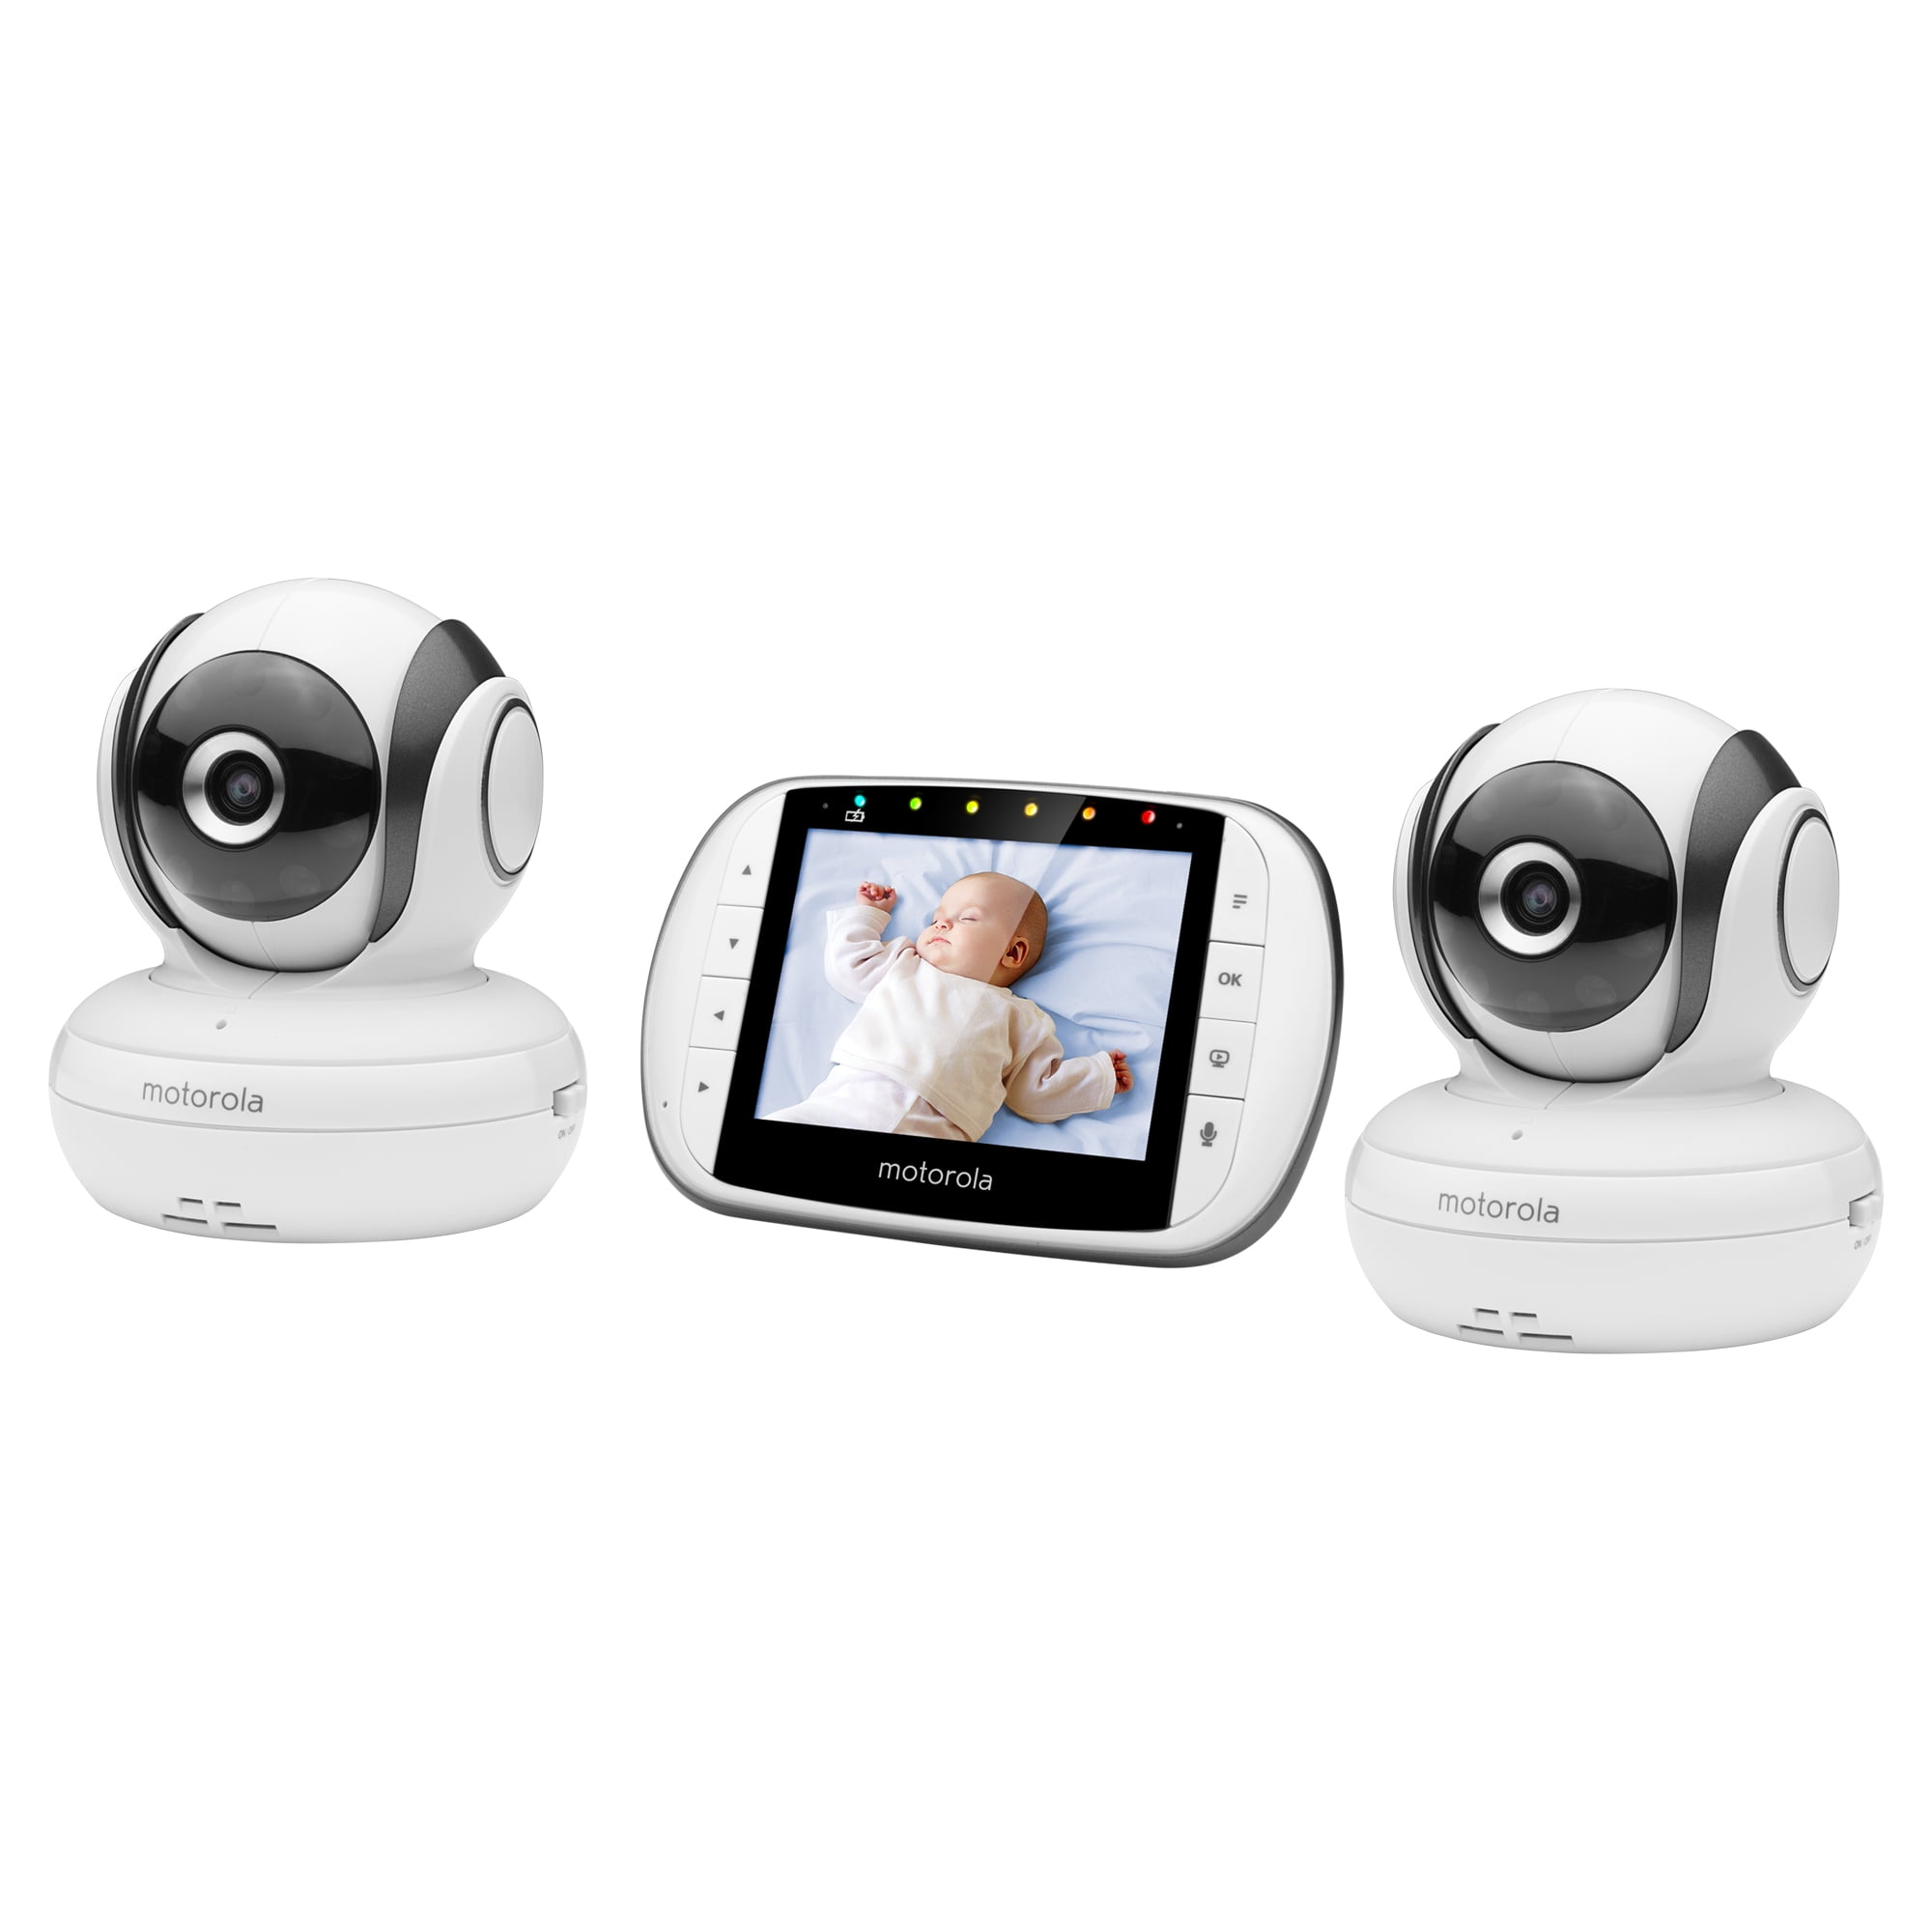 Motorola Mbp36s 2 Video Baby Monitor With 2 Cameras 3 5 Color Screen Remote Pan Tilt And Zoom Two Way Audio And Room Temperature Display Walmart Com Walmart Com